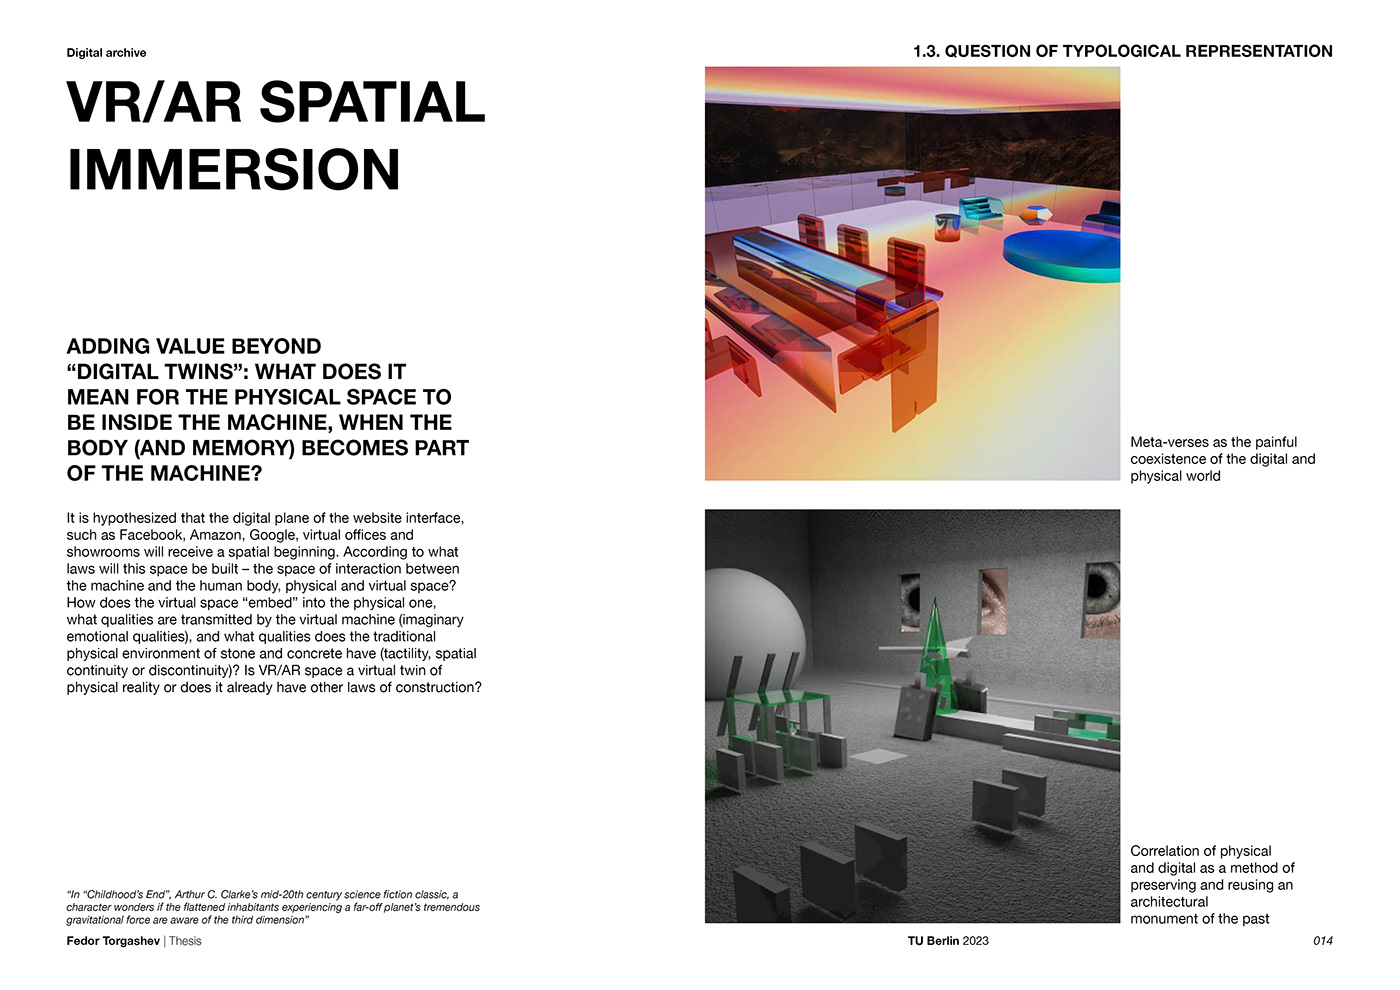 architectural design visualization typology reconstruction Archive thesis architecture corona Render representation